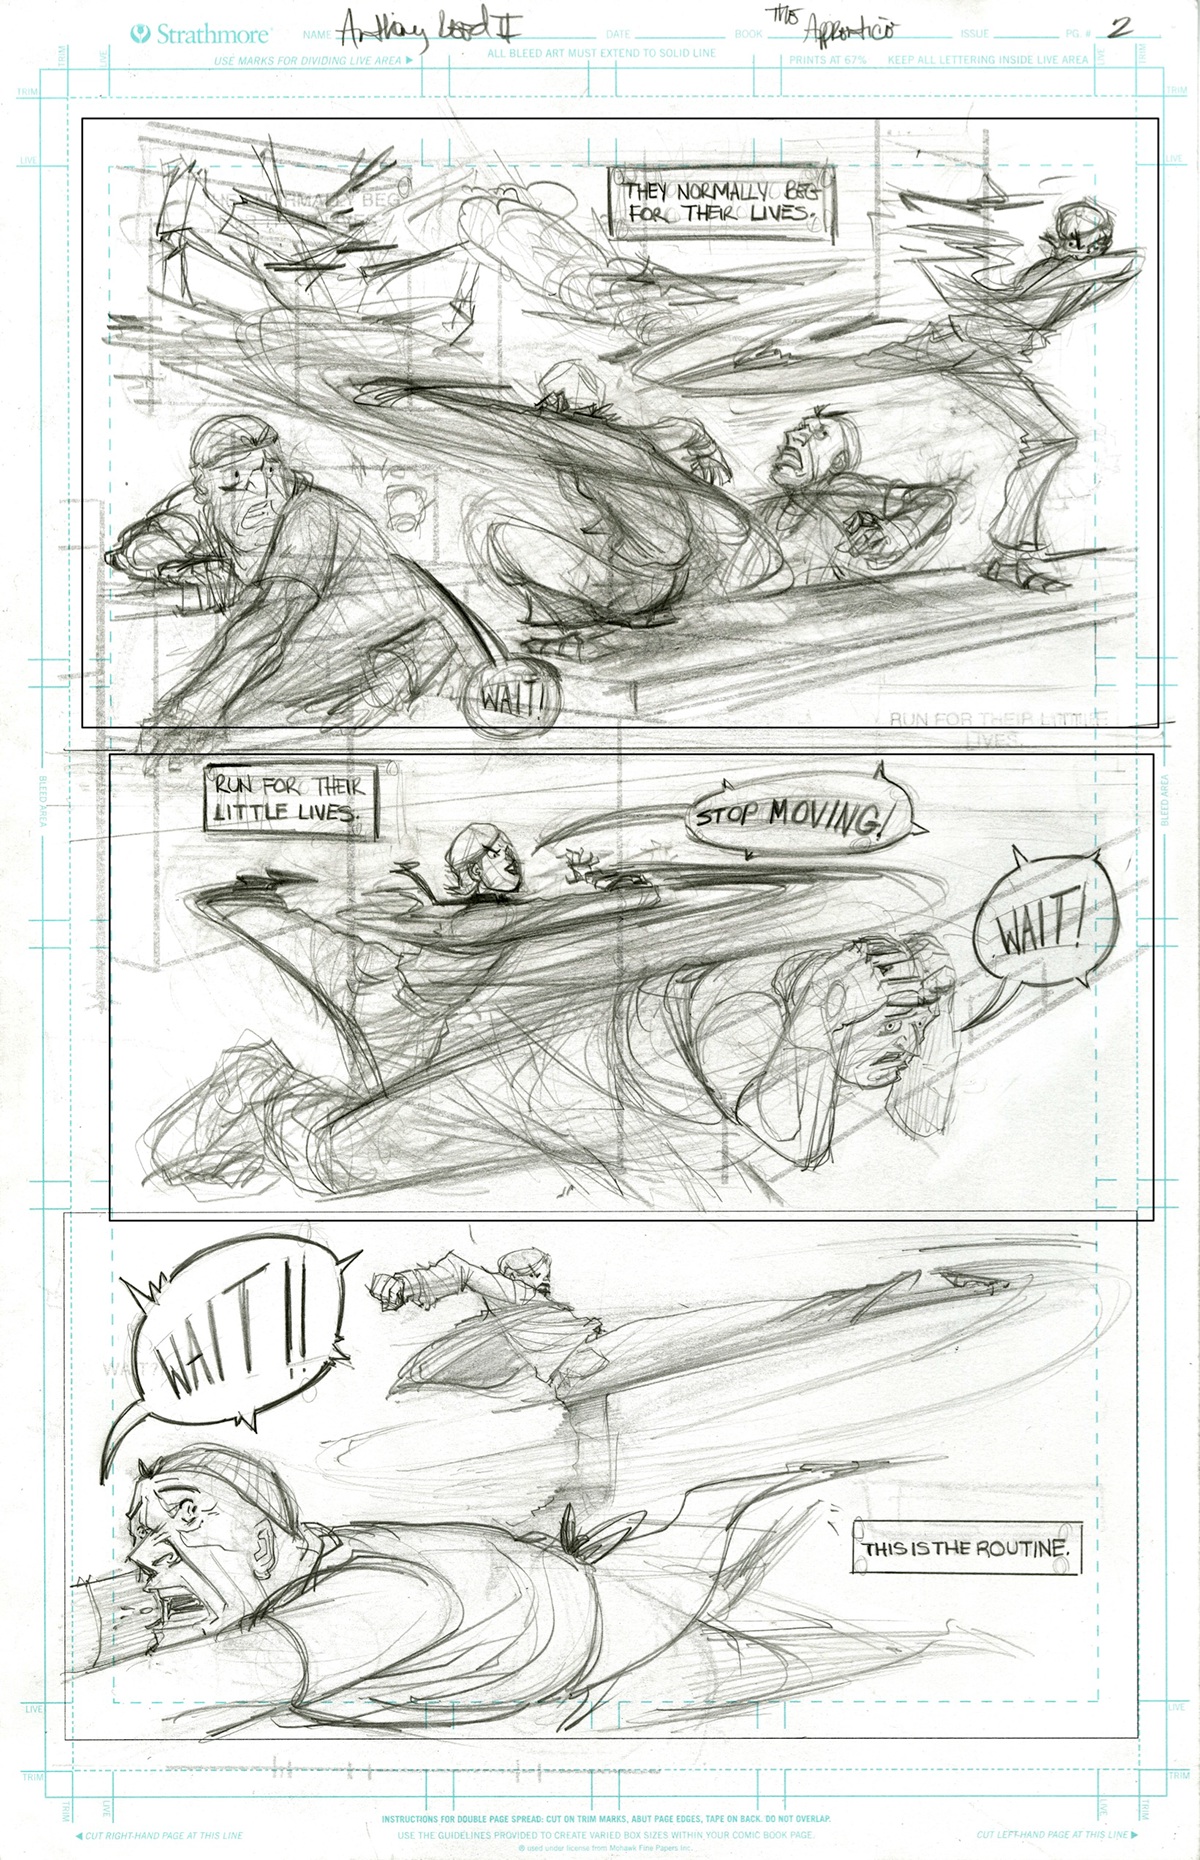 comic pages visual storytelling   composition pacing